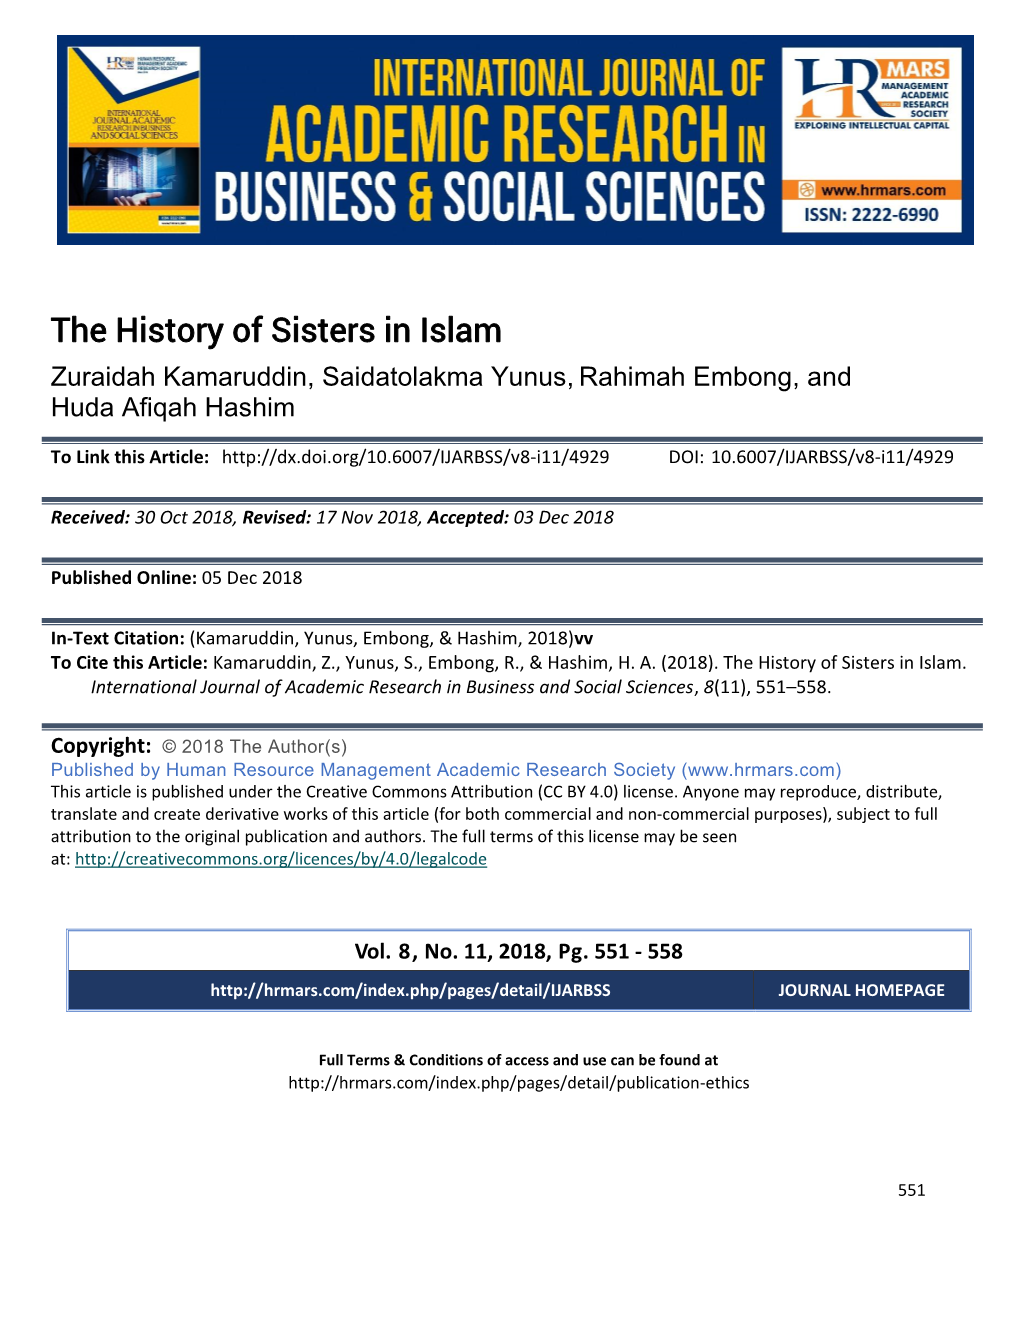 The History of Sisters in Islam